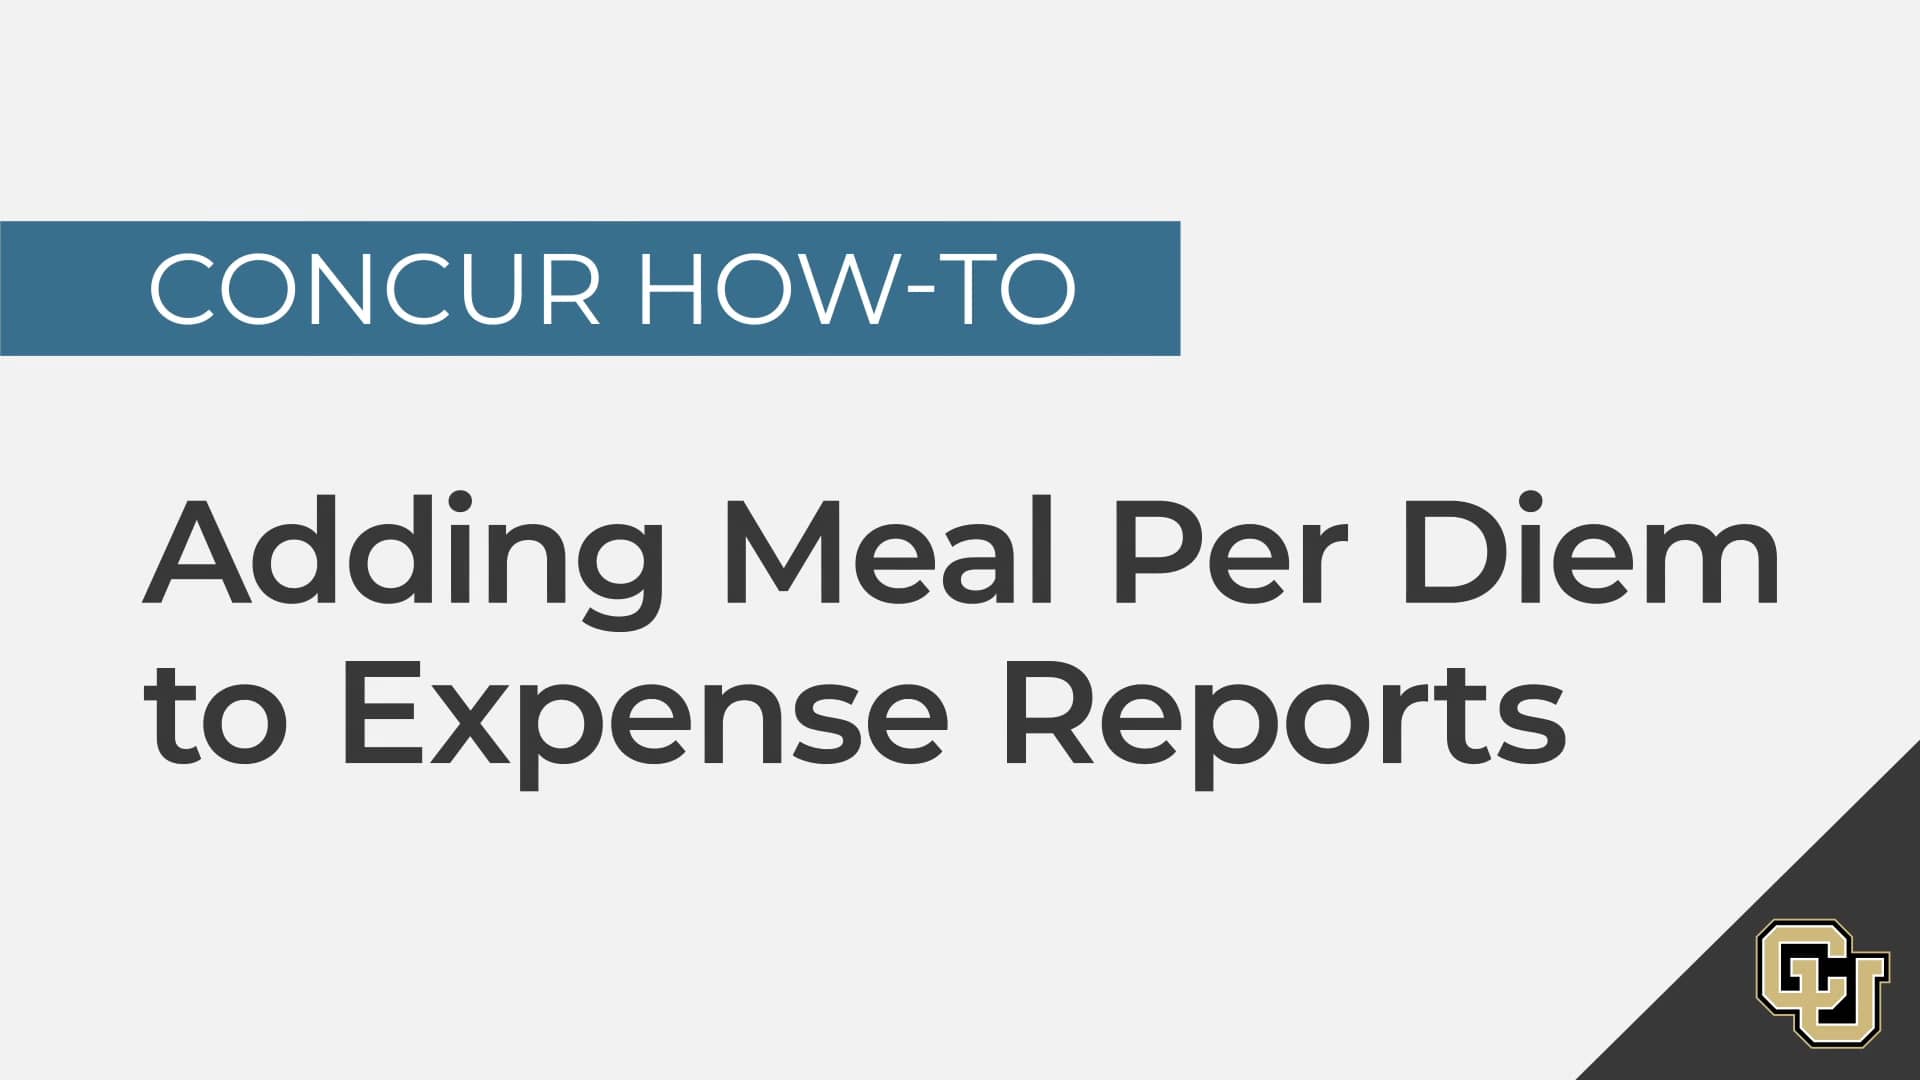 Concur HowTo Adding Meal Per Diem to Expense Reports on Vimeo